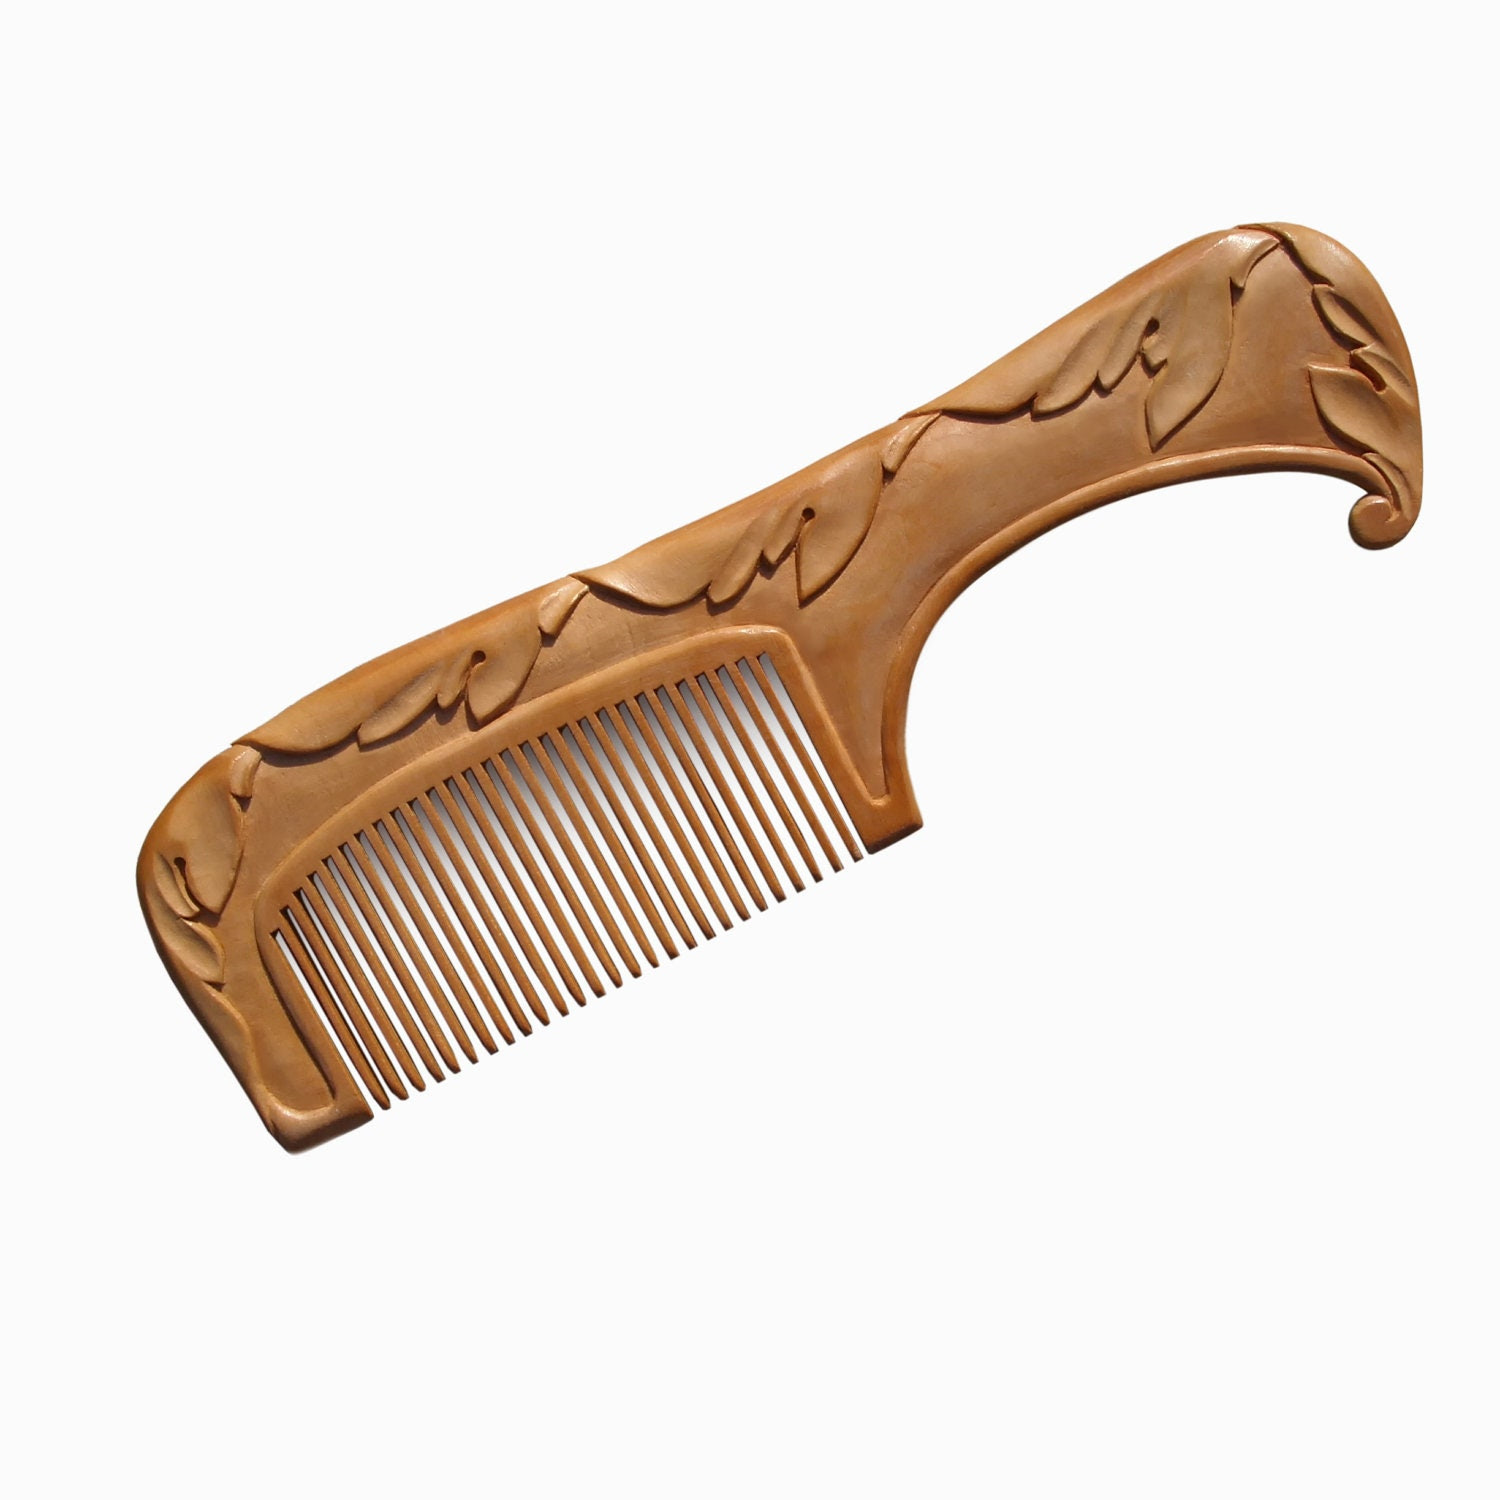 Wood Hair Comb Wooden Hair Combs Hand Wood Carving Hand Carving Wooden Hair Comb MariyaArts - mariya4woodcarving